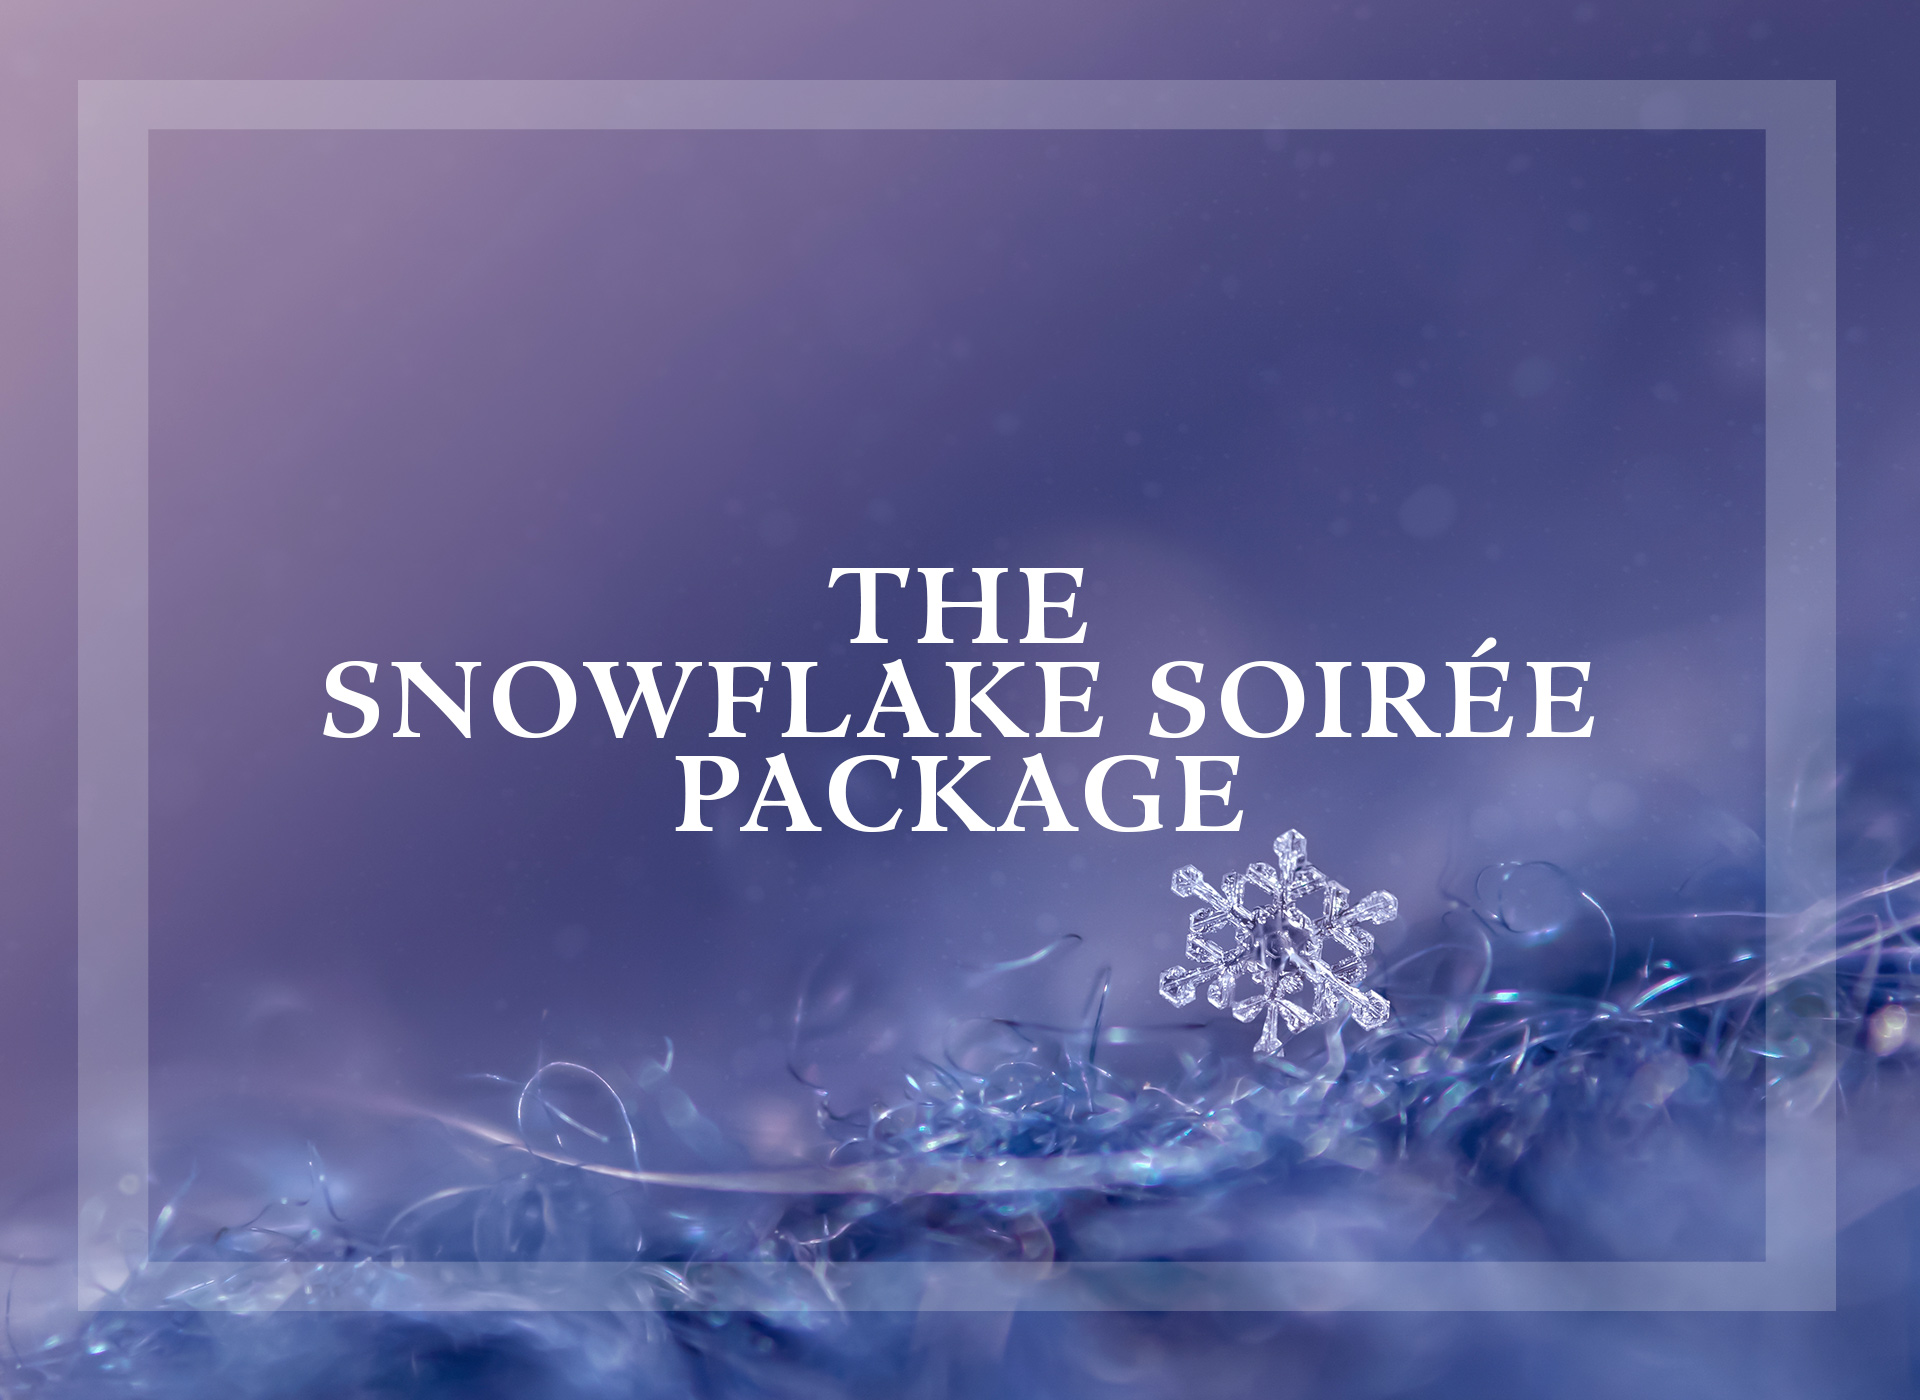 The Snowflake Soiree Package